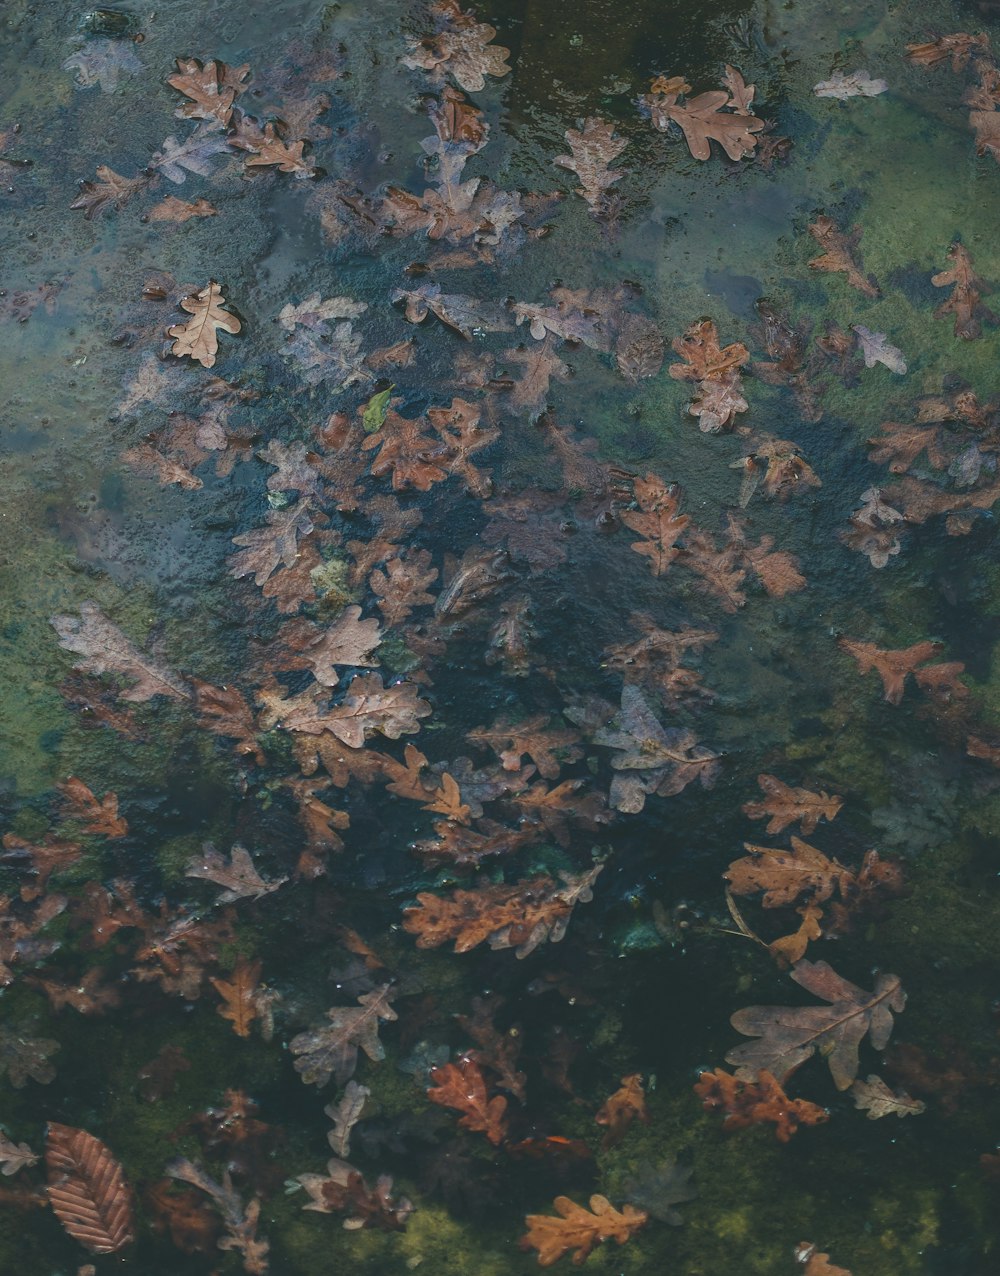 a group of leaves floating on top of a body of water